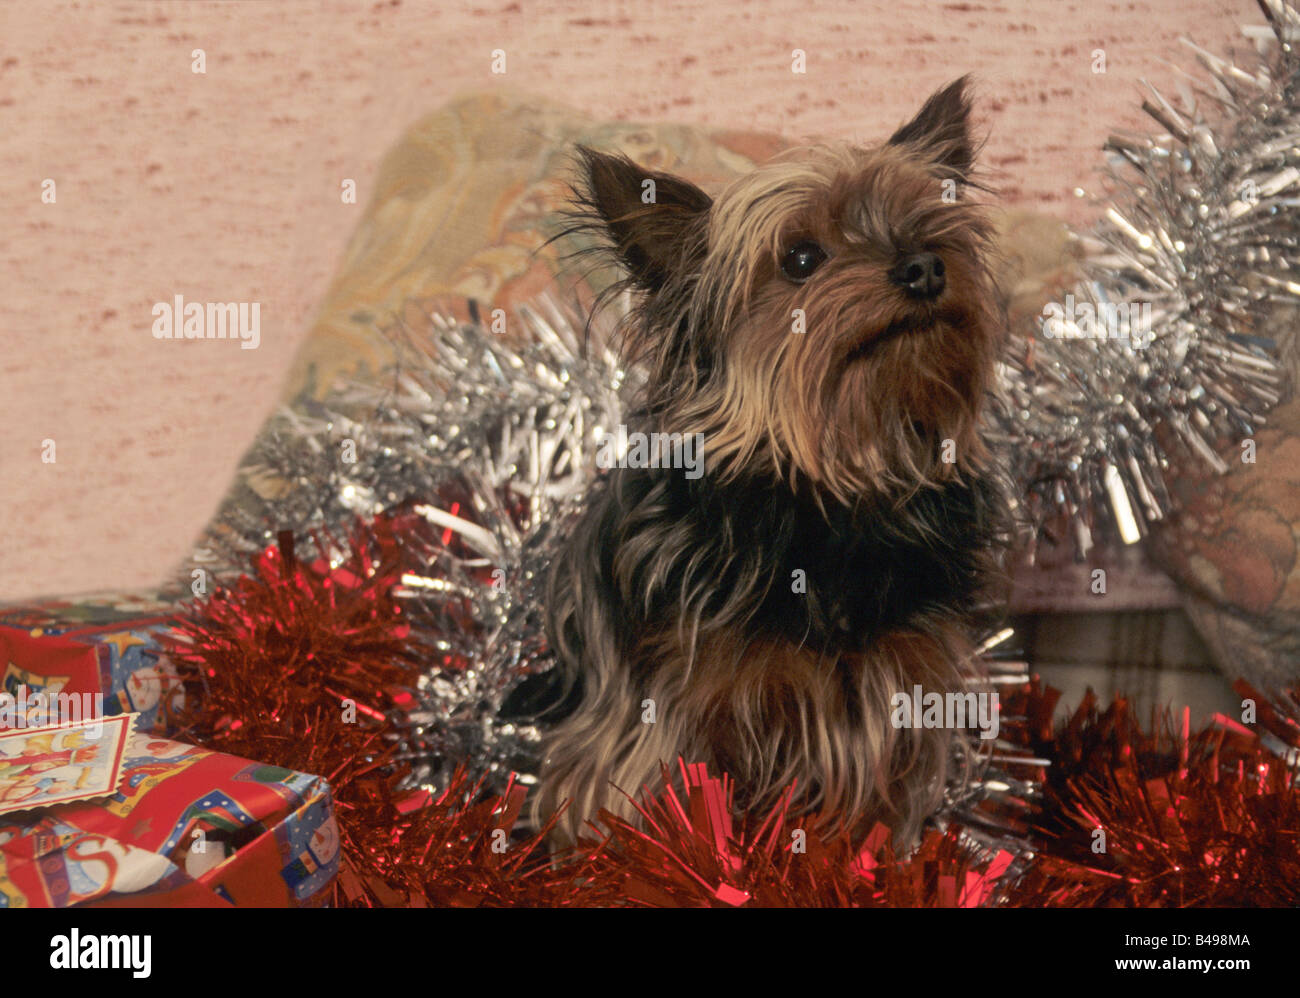 yorkshire terrier dog surrounded by tinsel and presents at Christmas time Stock Photo